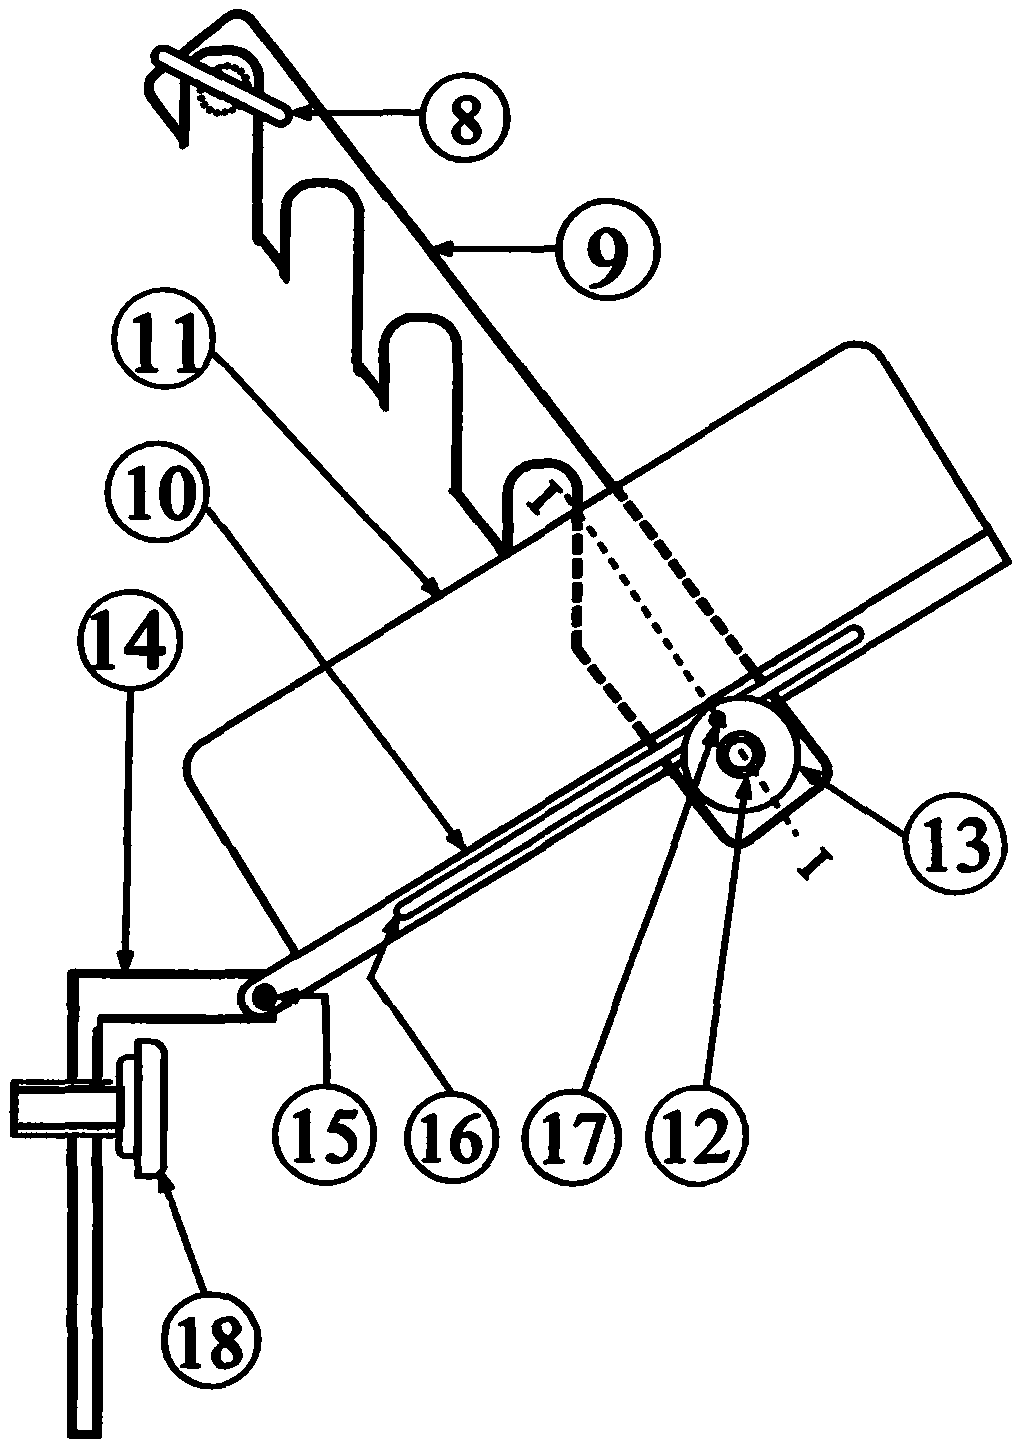 Dual-footboard device for electric two-wheeled/three-wheeled vehicles